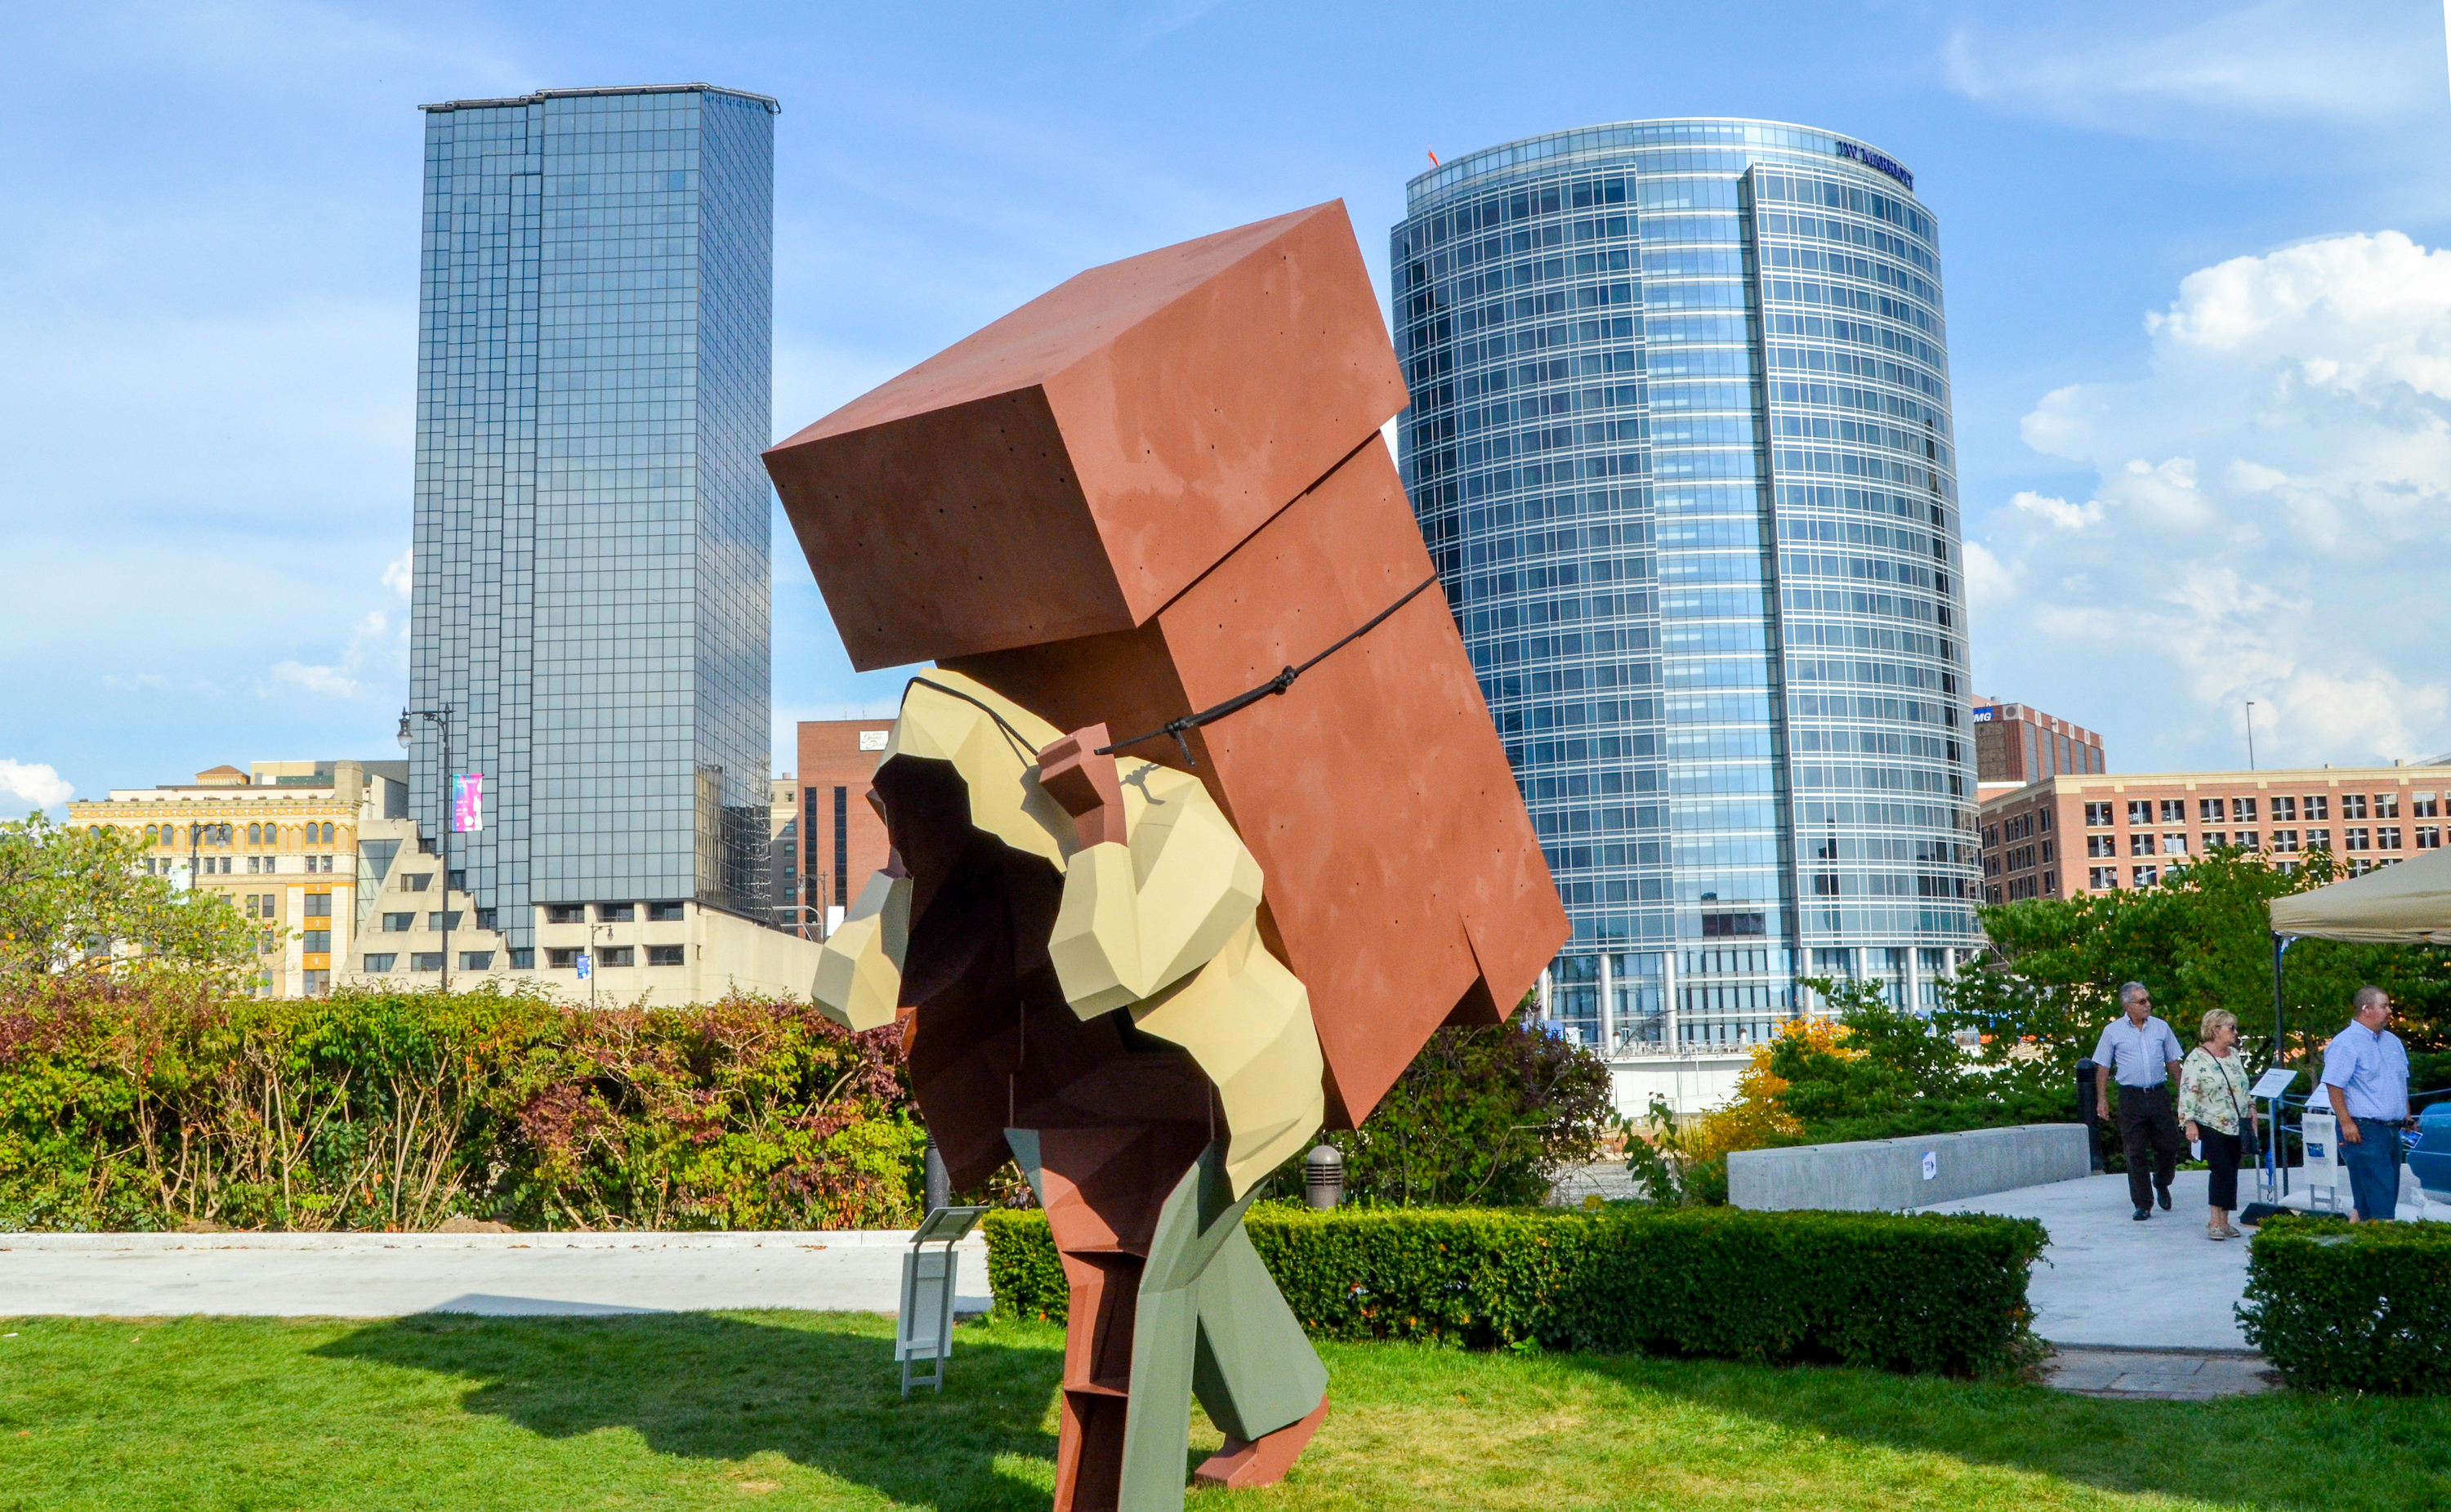 "Laborer" by Mike Wsol, in front of the Grand Rapids Public Museum